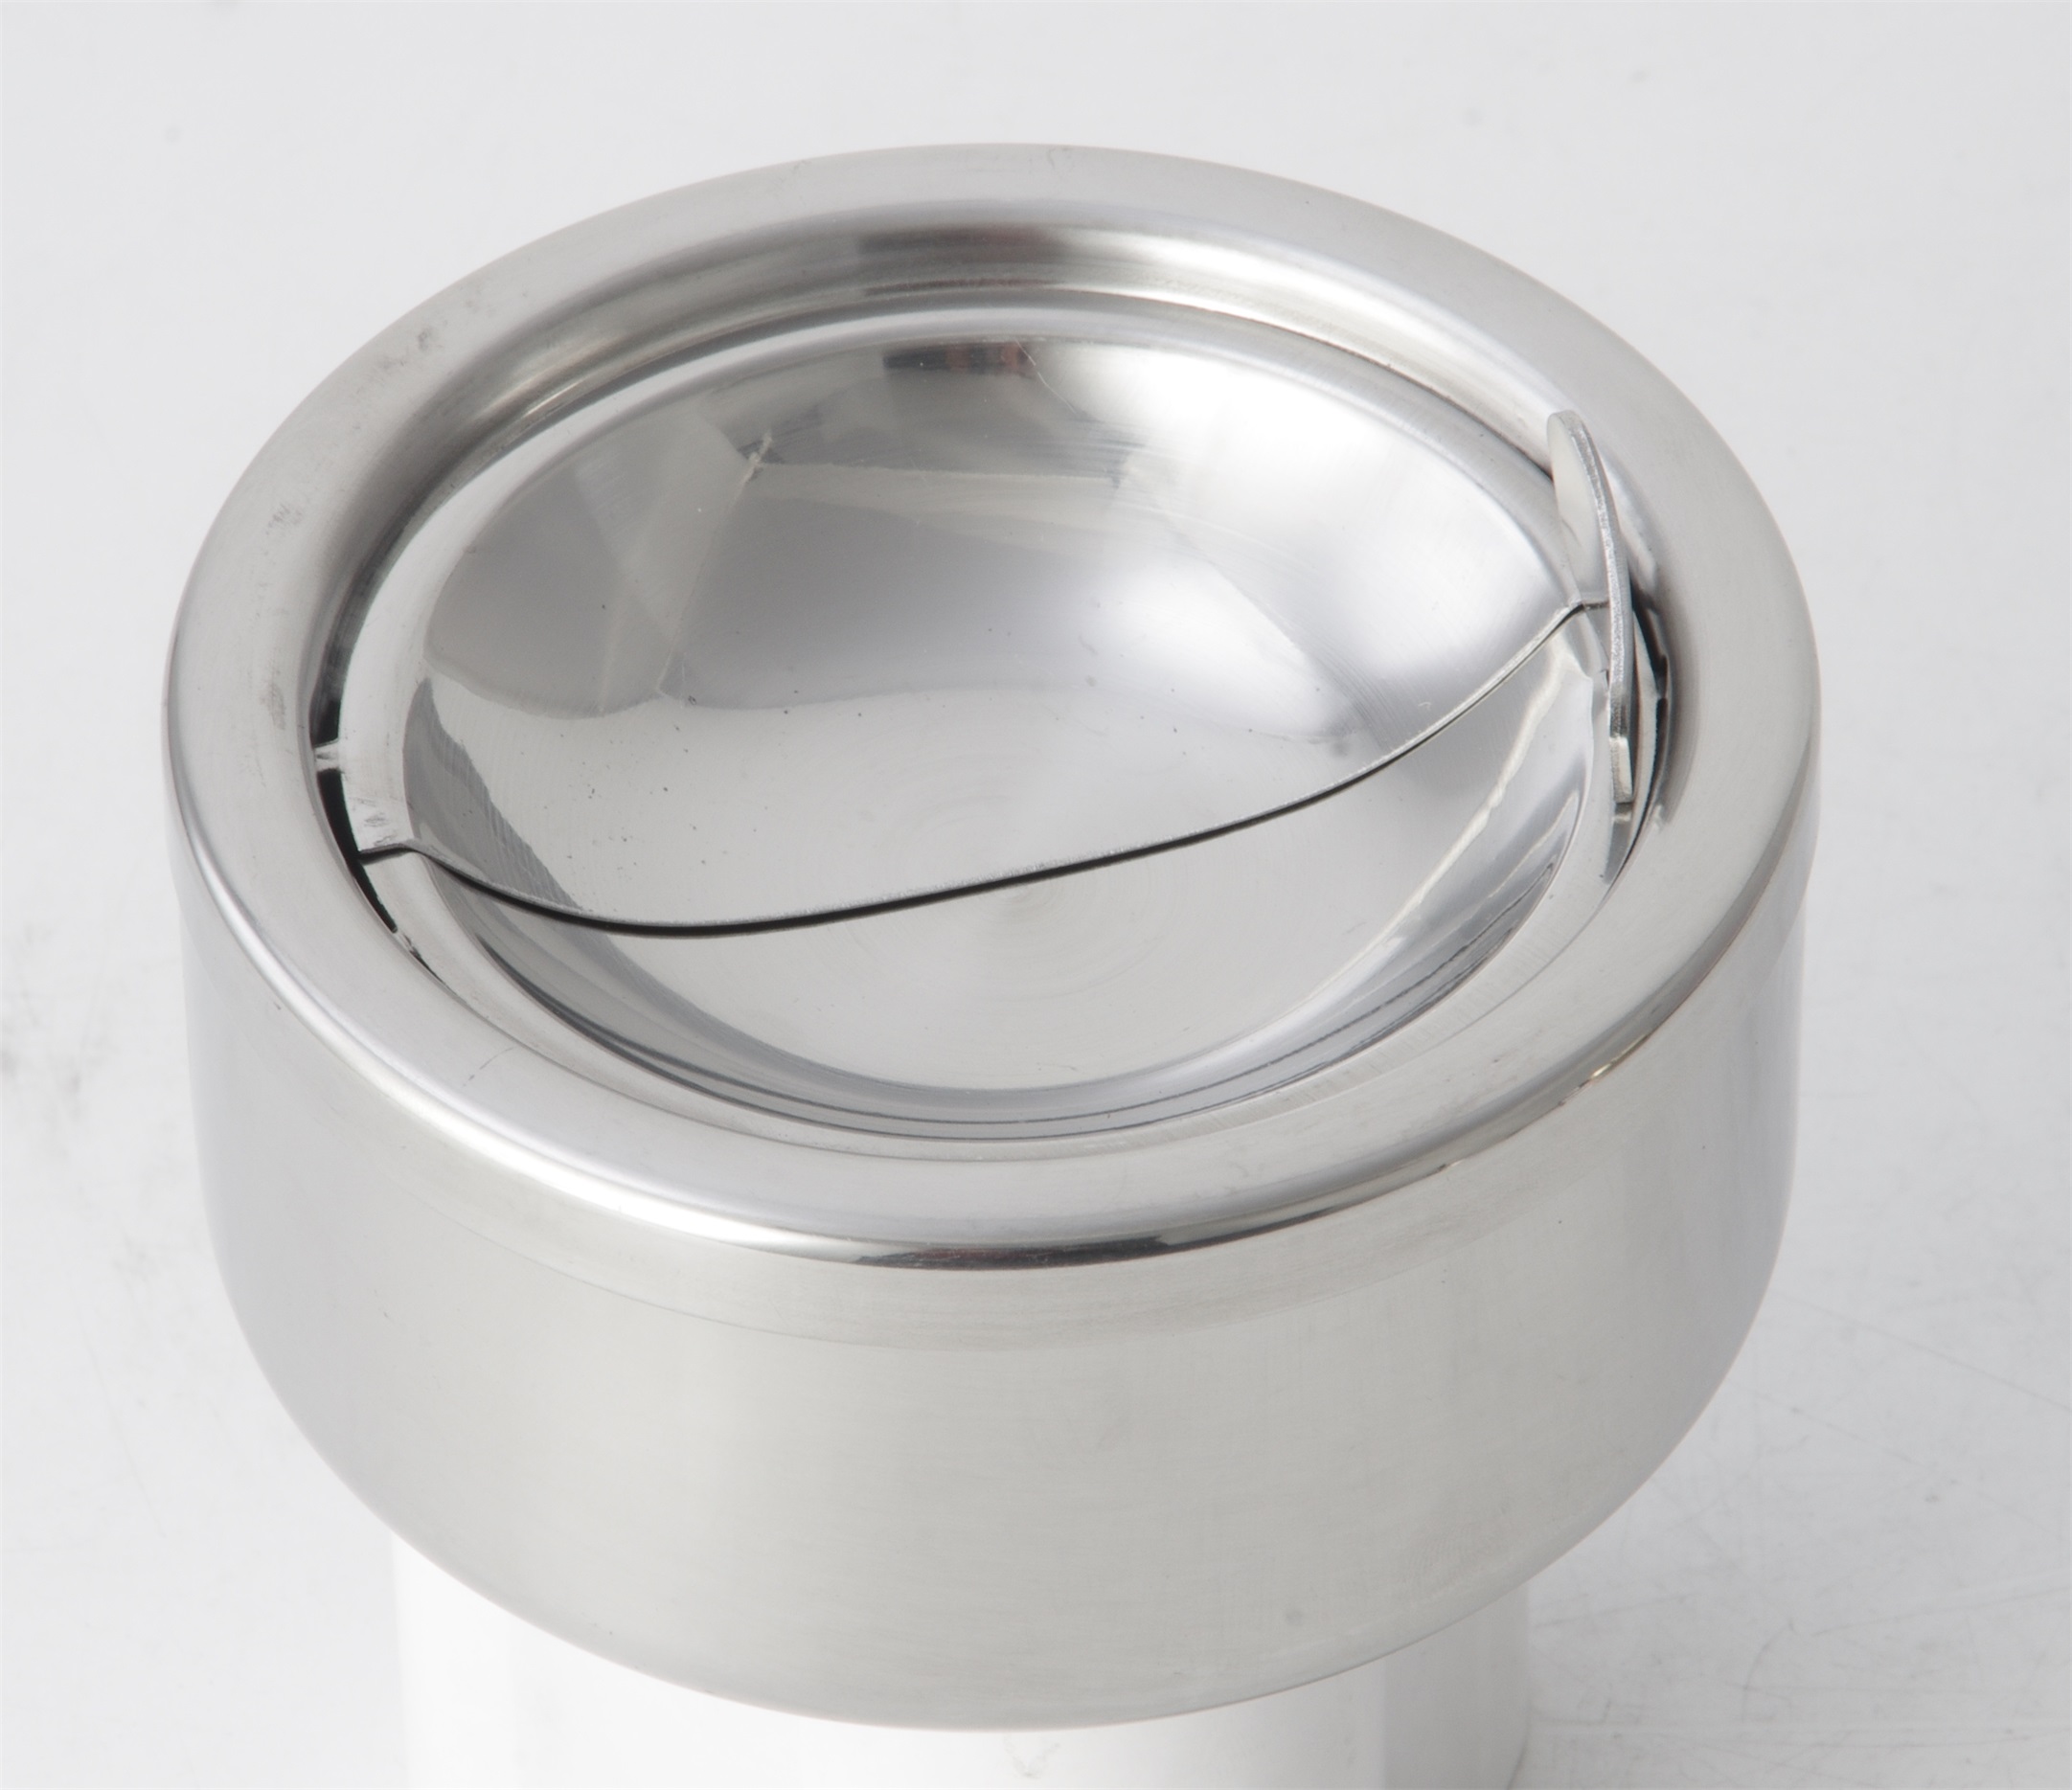 New stainless steel ashtray Suppliers for kitchen